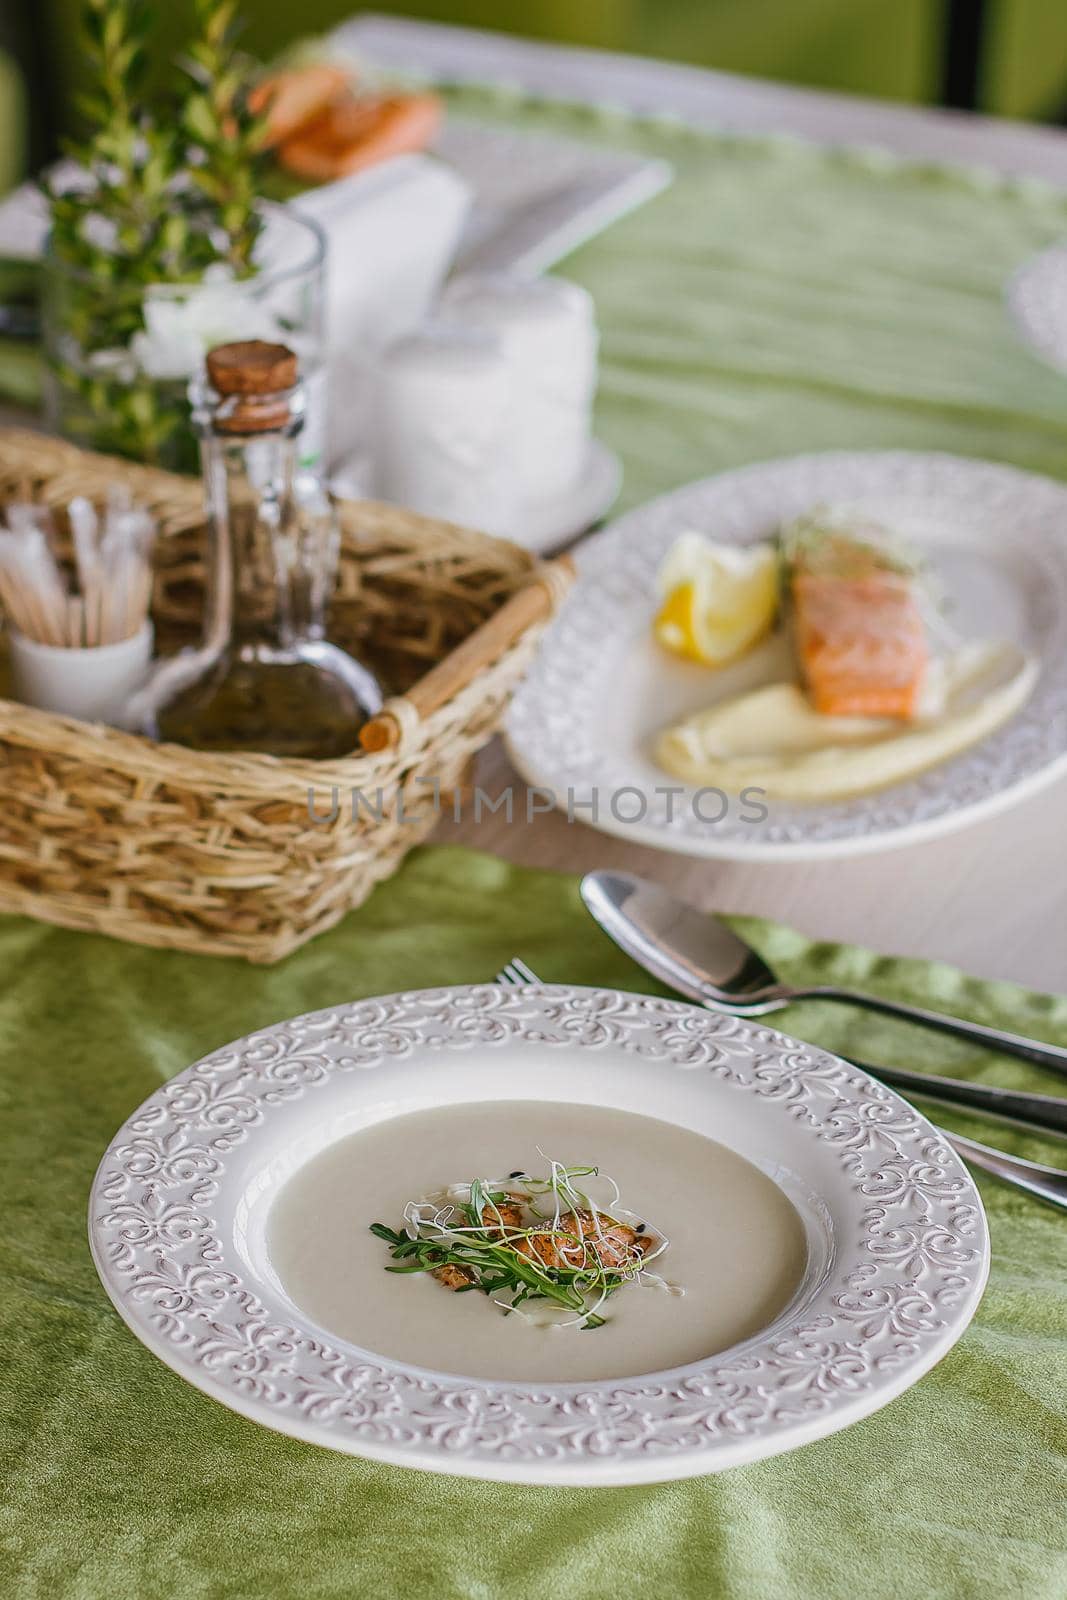 Cheese soup with salmon in green interior background.